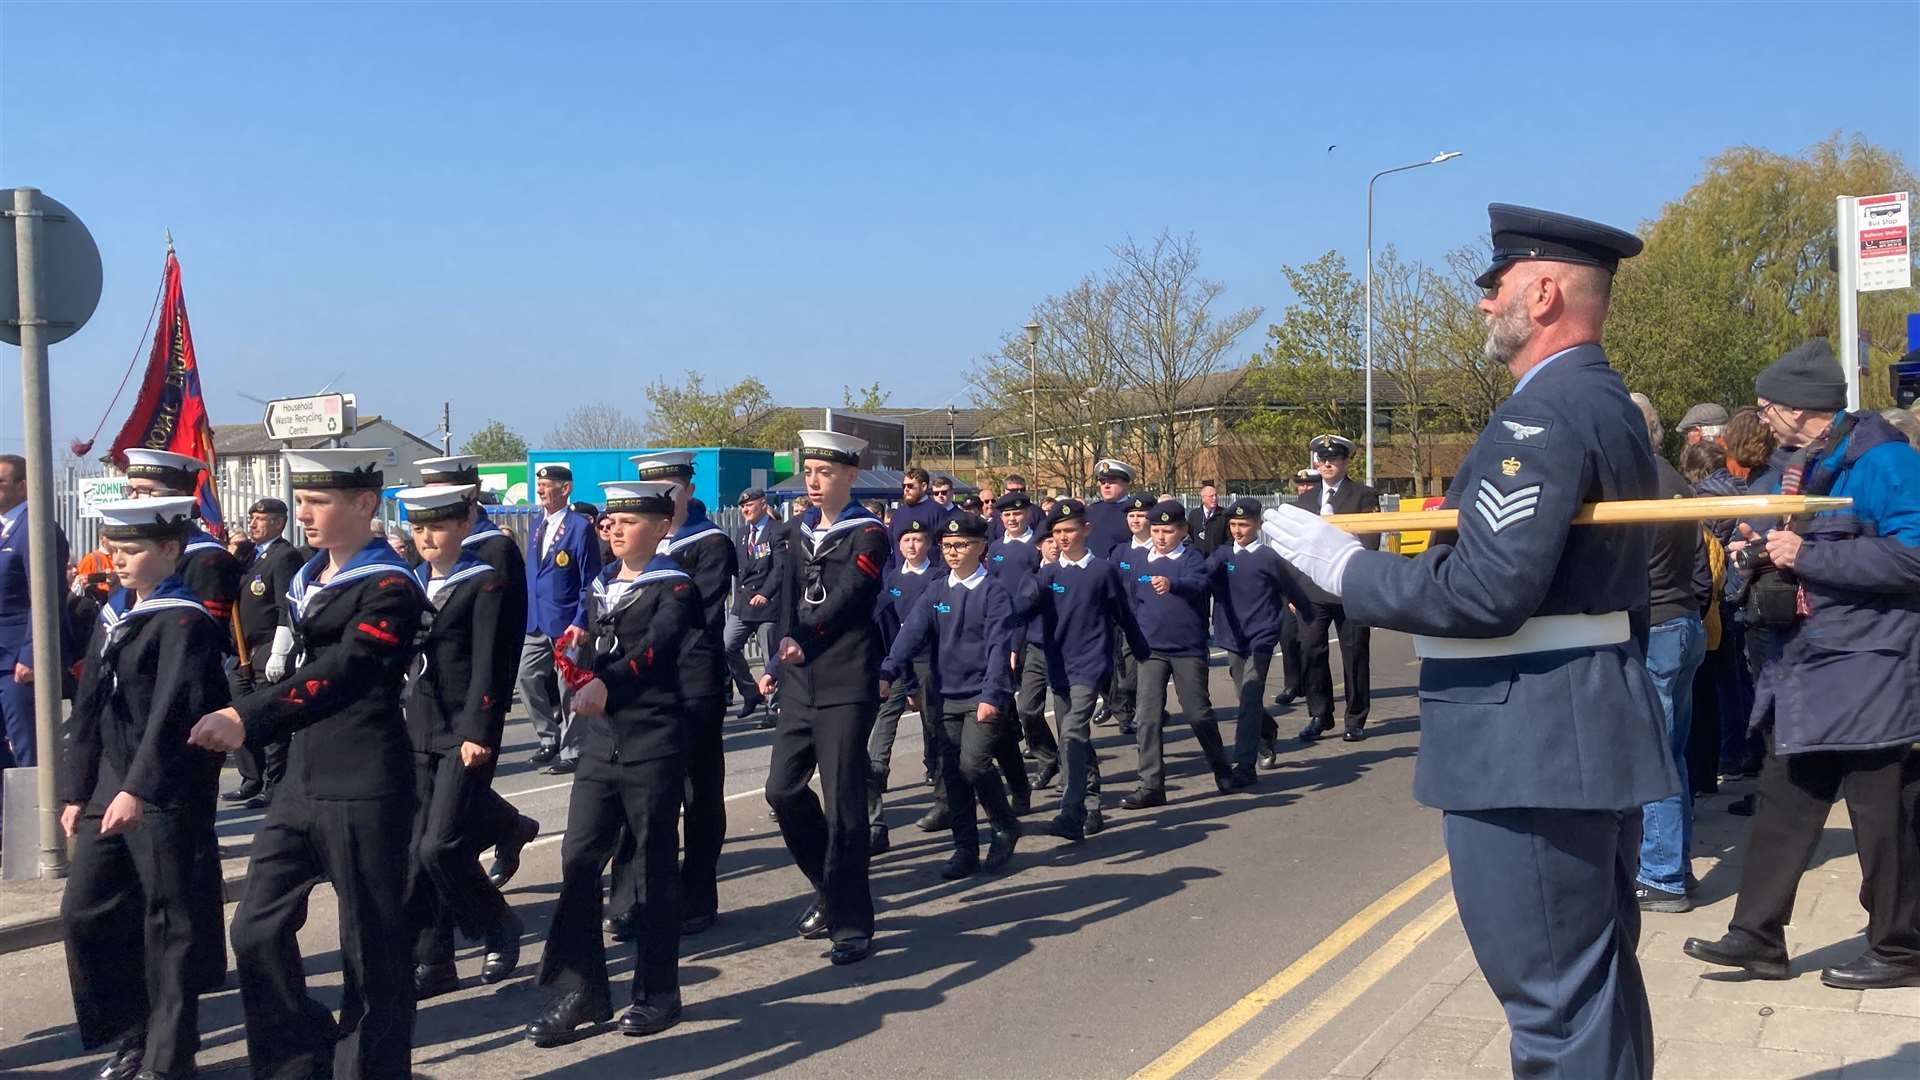 Sheppey Sea Cadets on parade for the dedication of the new memorial wall in Sheerness